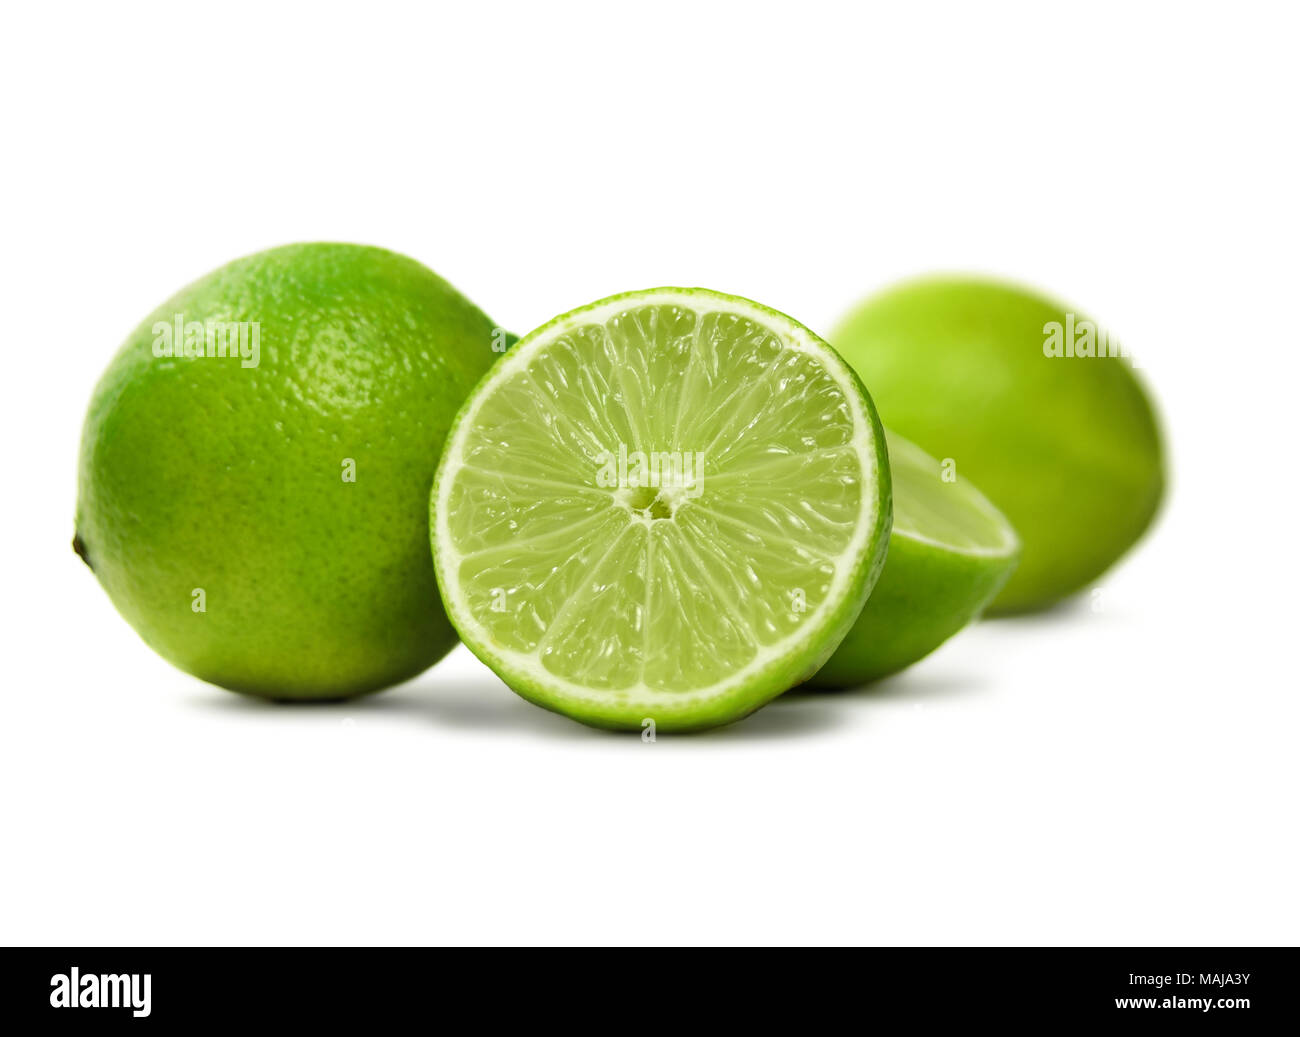 Fresh limes, isolated on white background. Cross section and whole lime fruits with mint leaf, citrus fruit background. Stock Photo